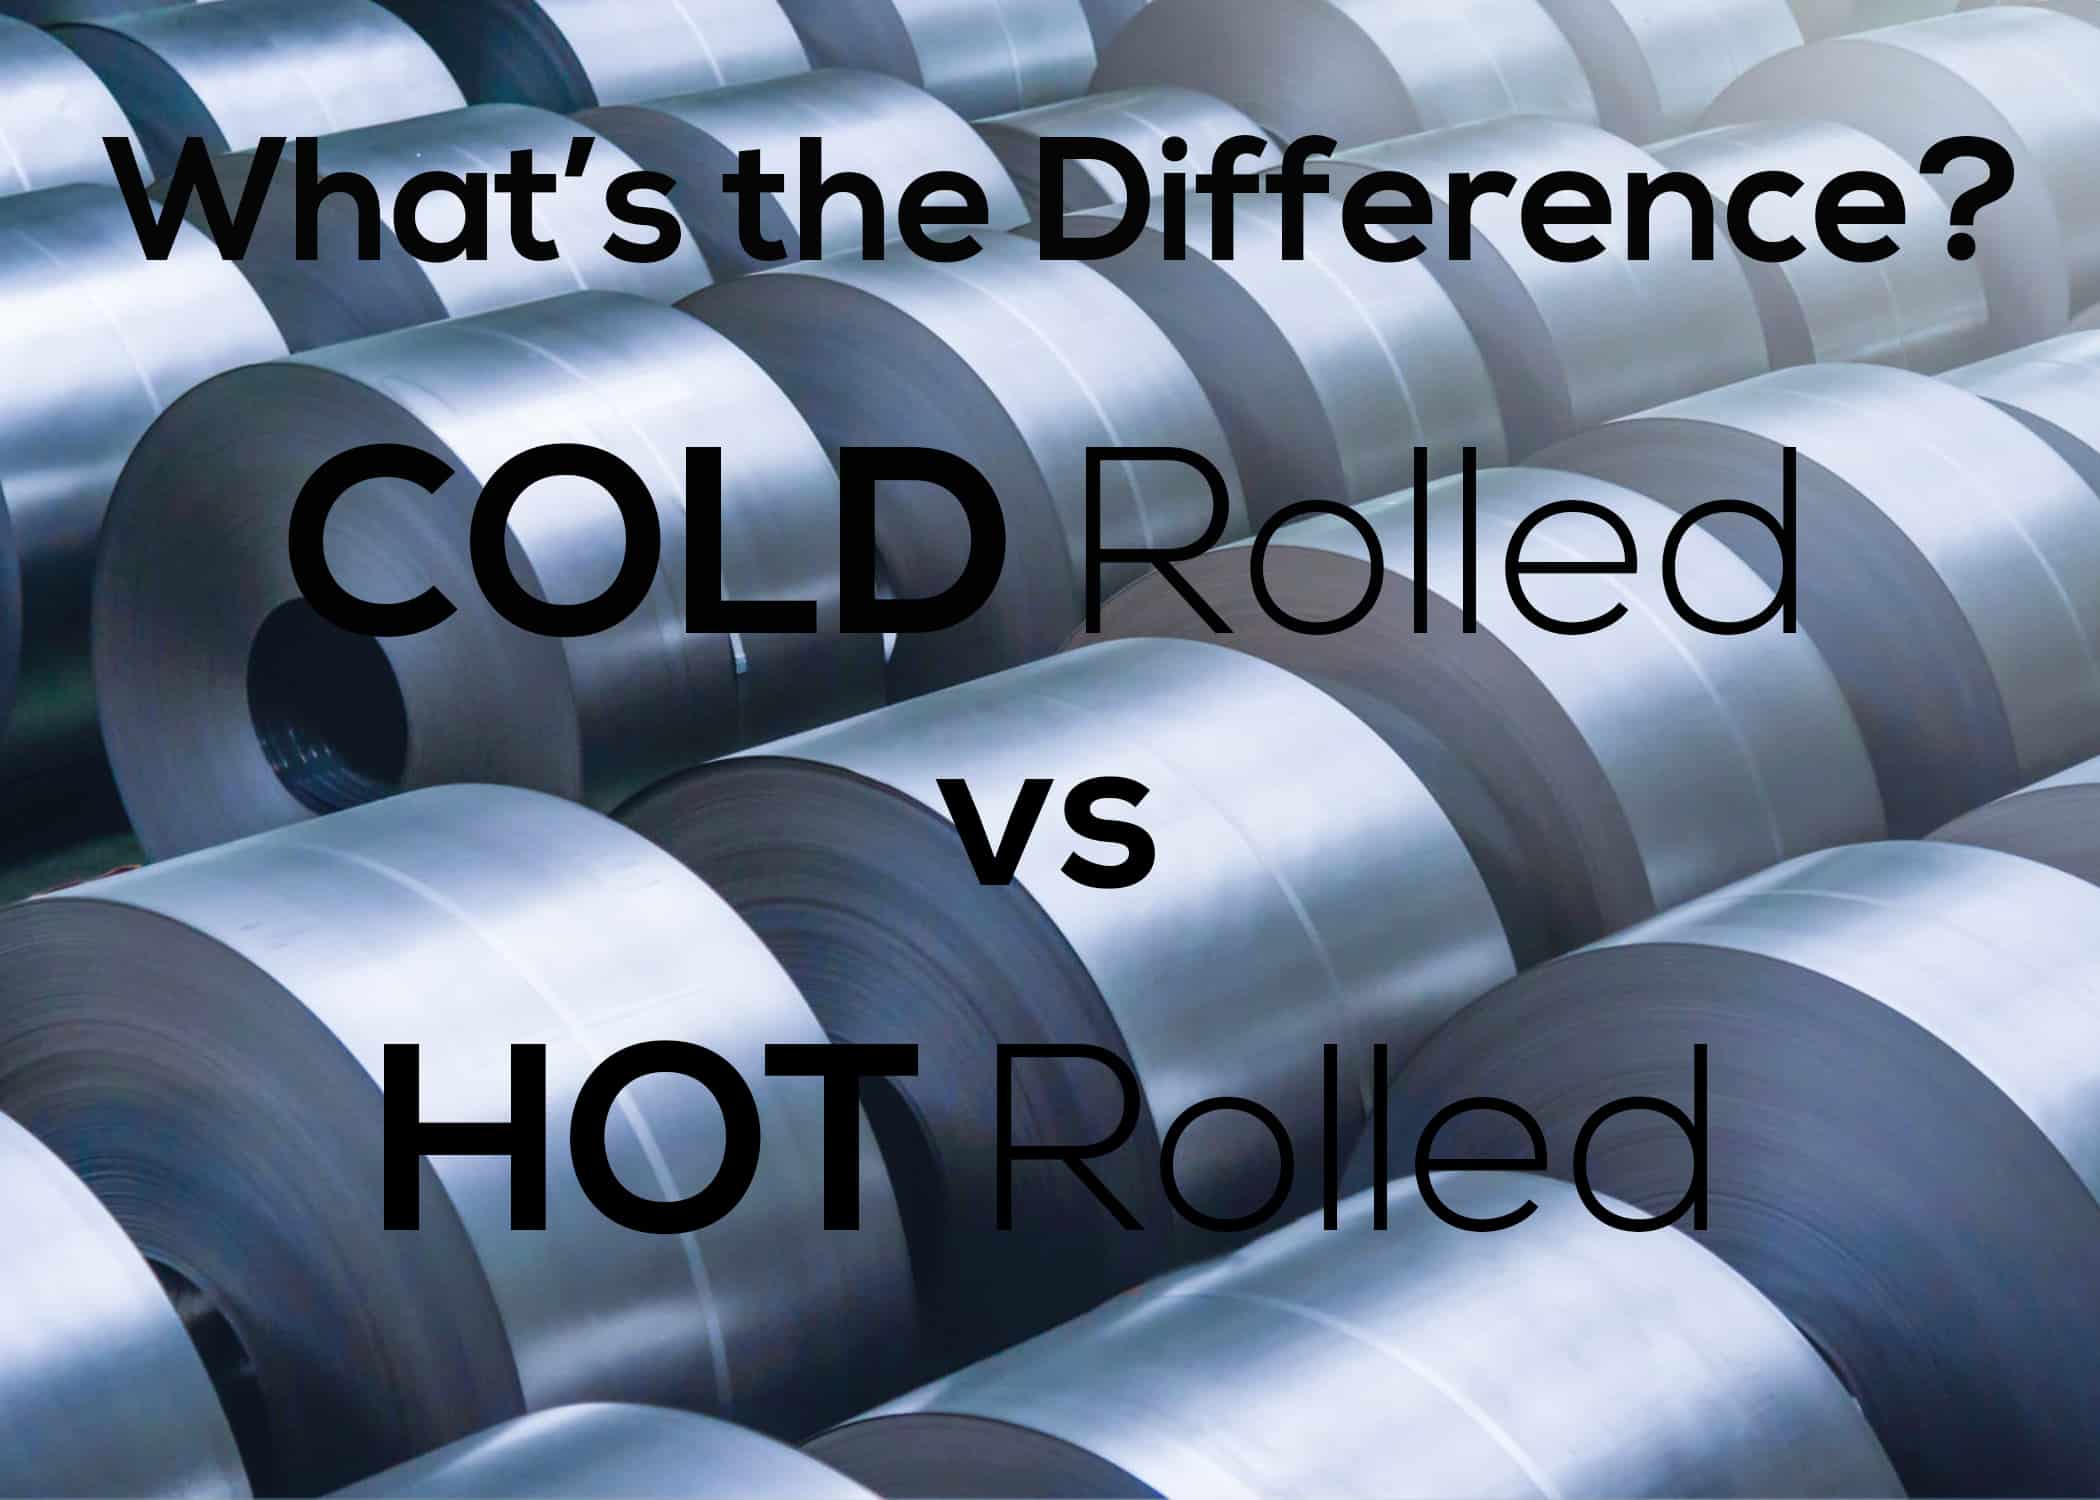 Cold Rolled vs. Hot Rolled Steel